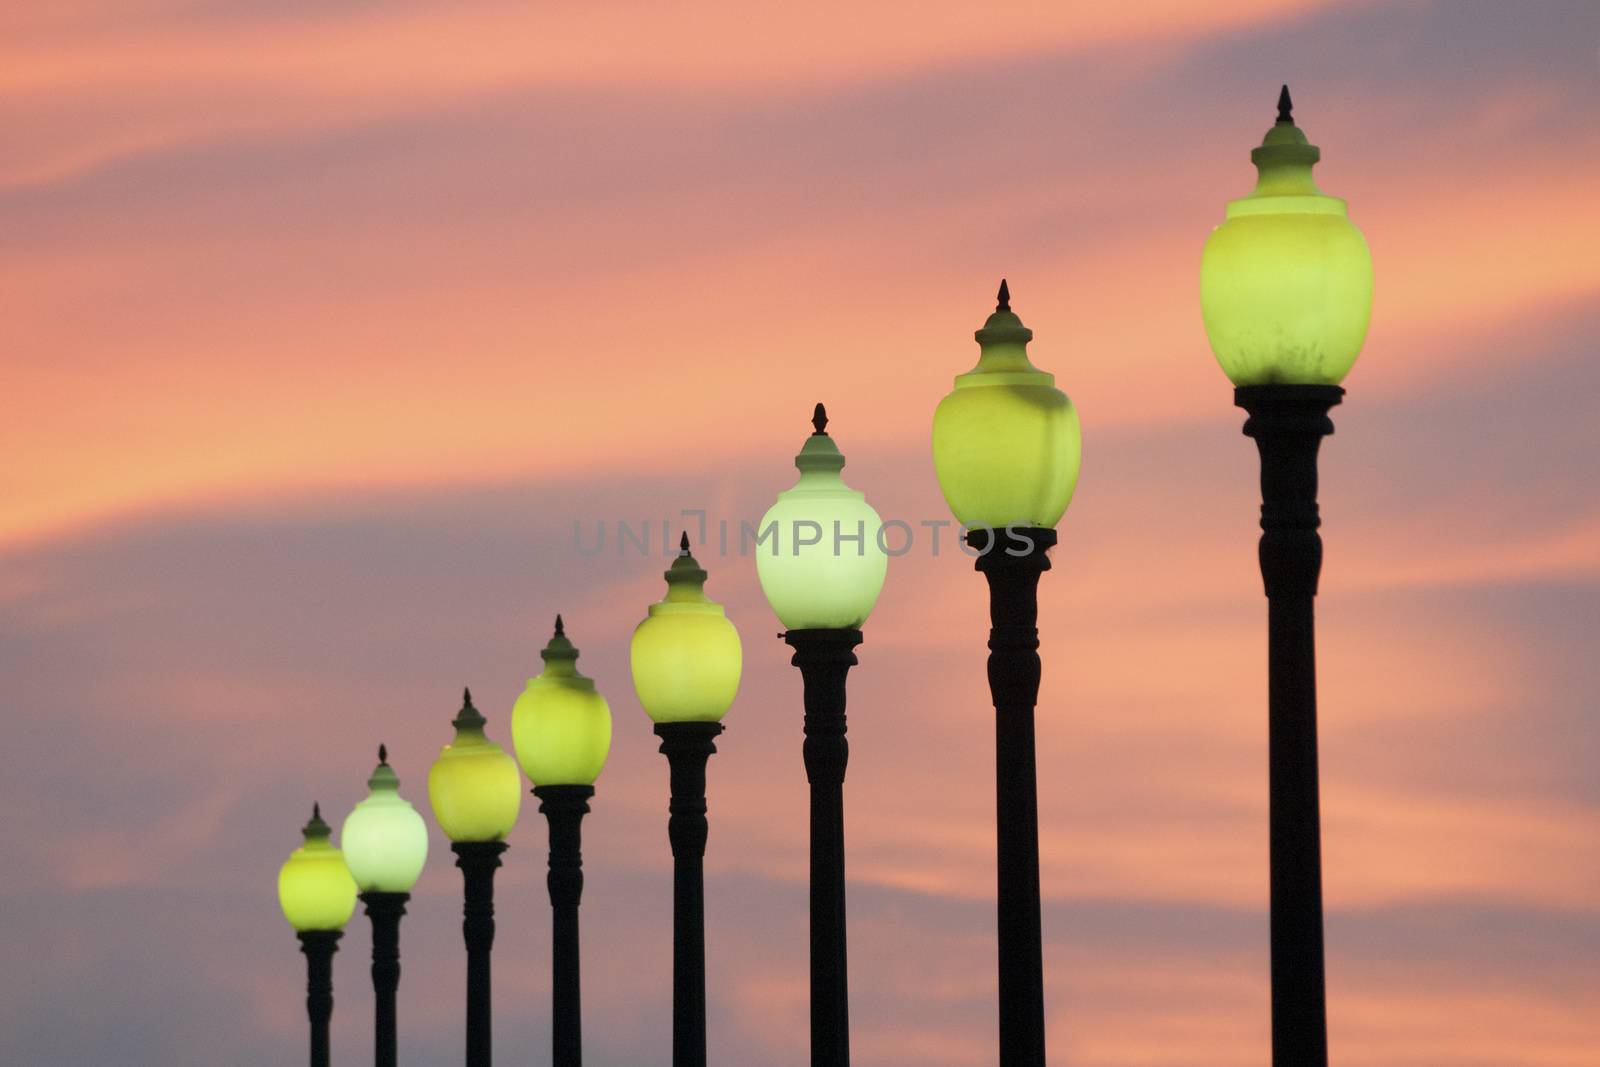 row of classic style city lamps over twilight sky in Barcelona, Spain